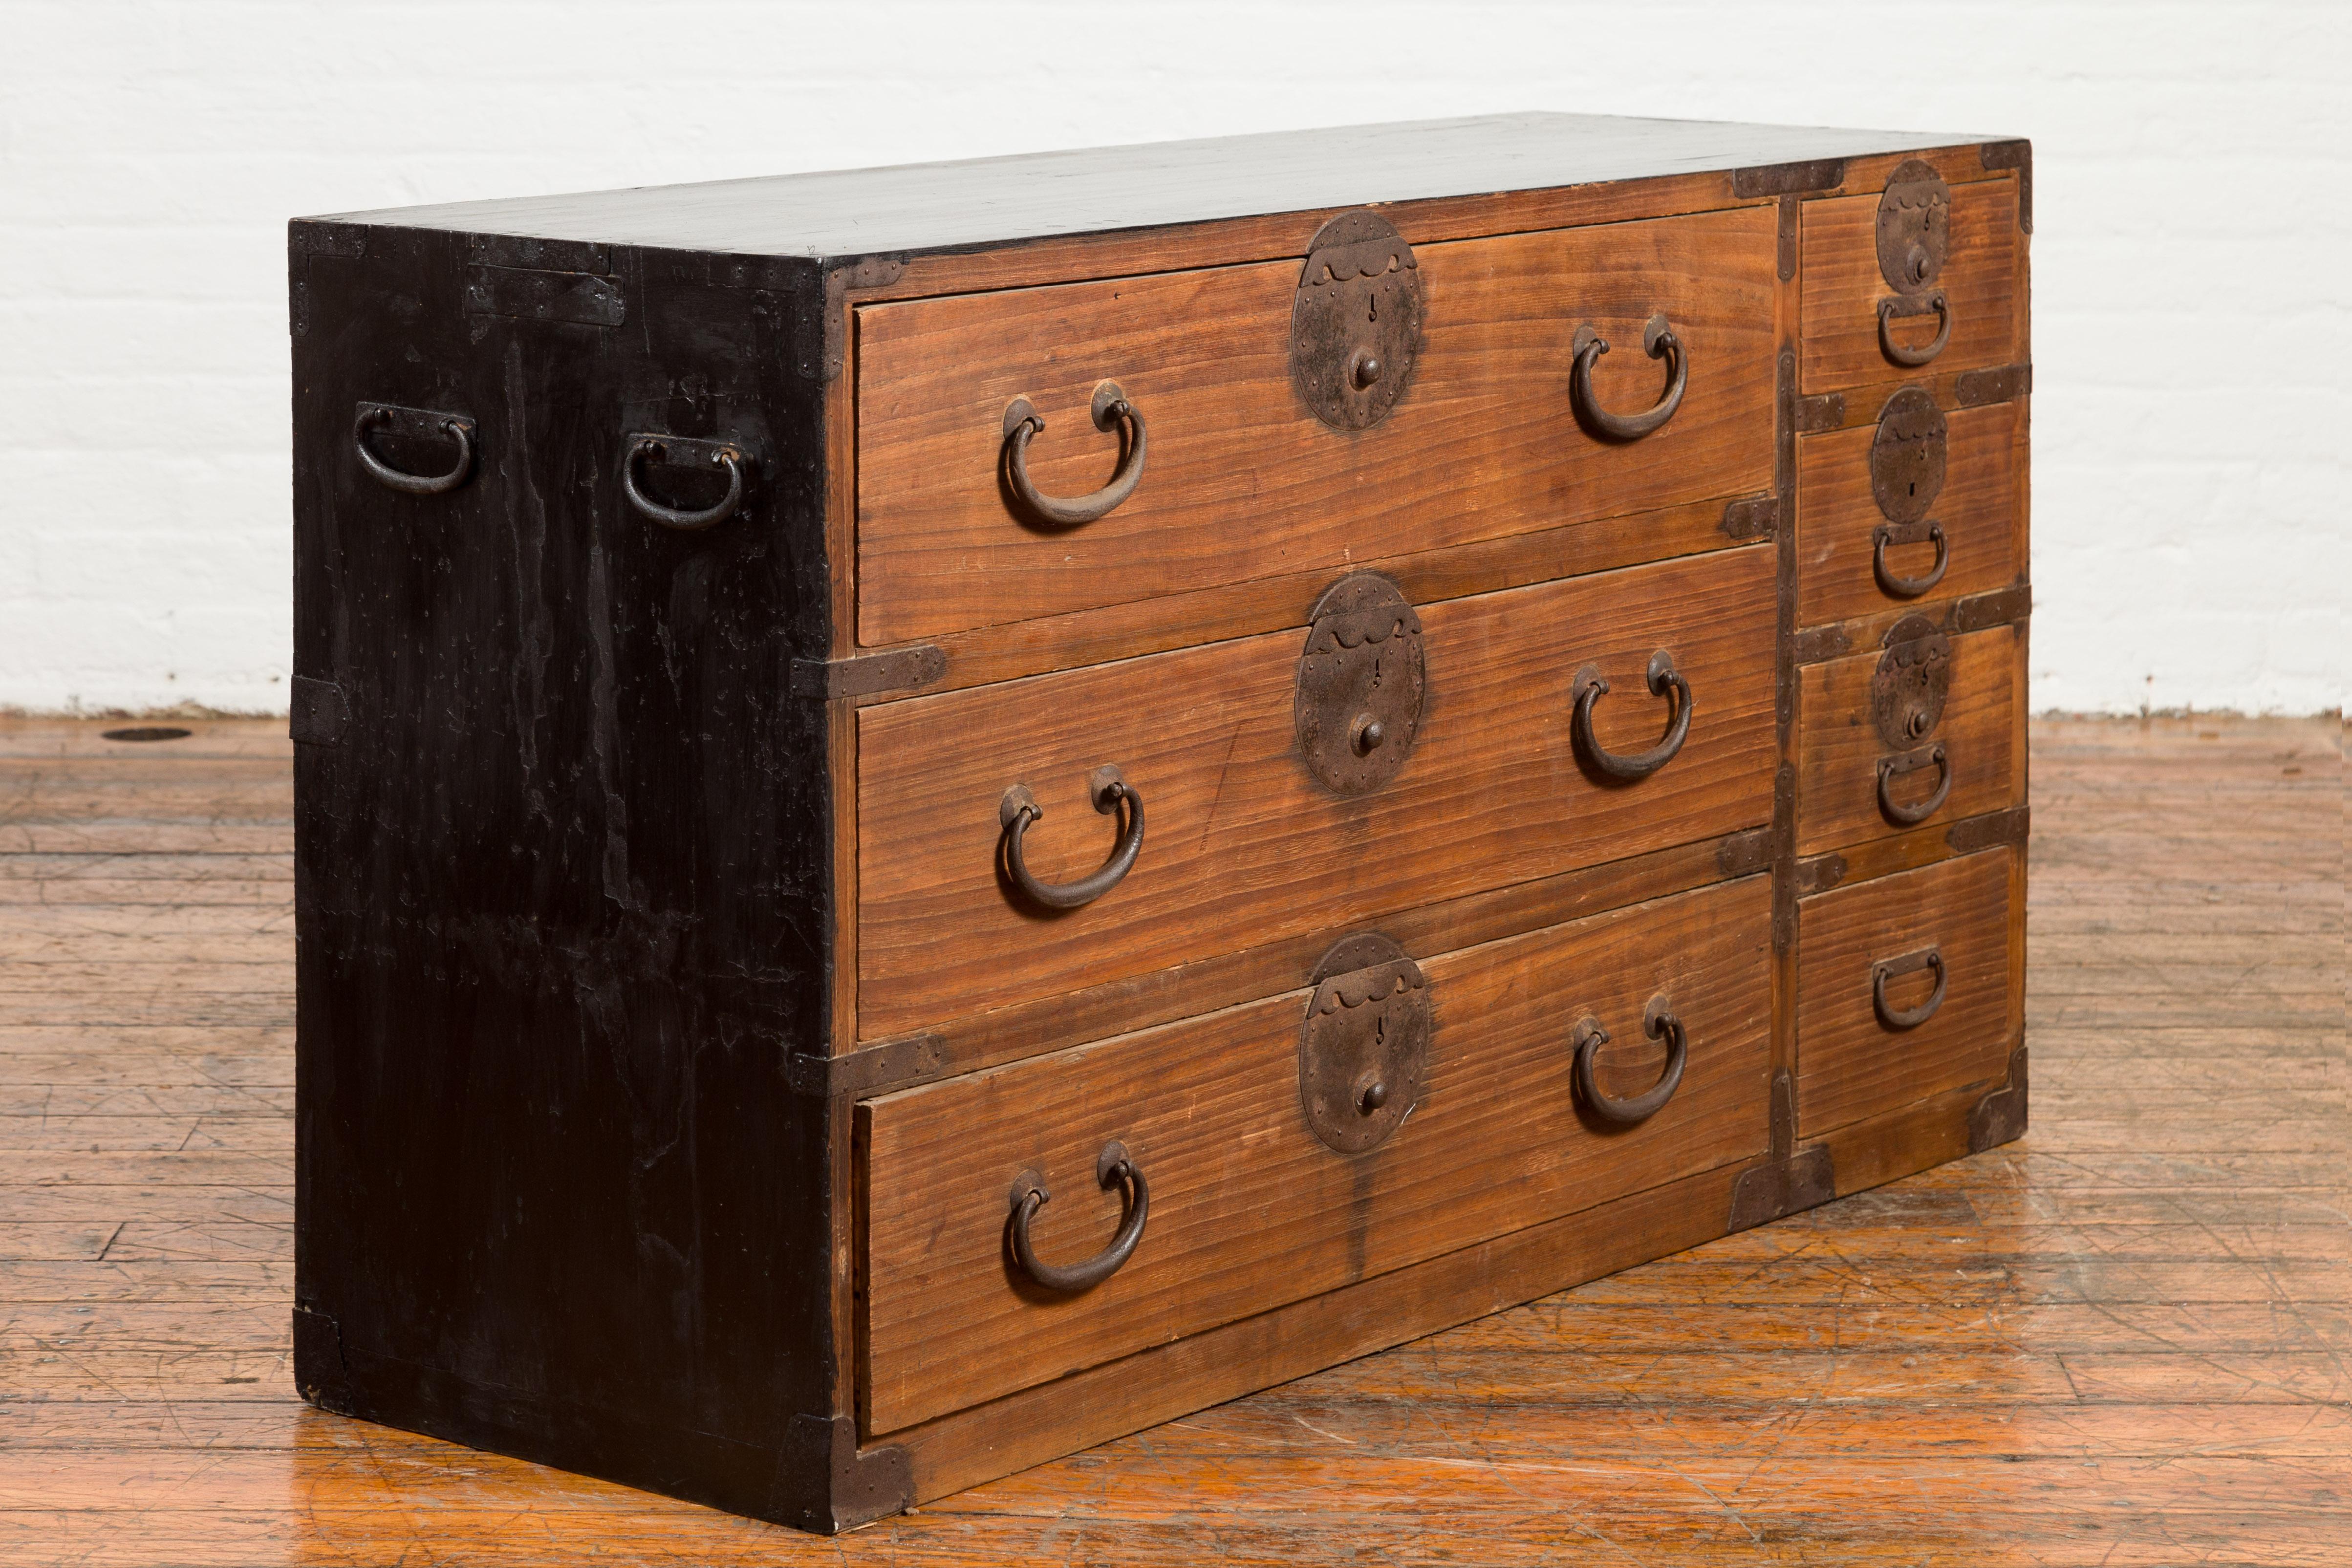 A Japanese late Meiji period keyaki wood tansu chest from the late 19th century, with seven drawers and iron hardware. Created in Japan during the Meiji period, this keyaki tansu chest features a rectangular top sitting above seven drawers fitted